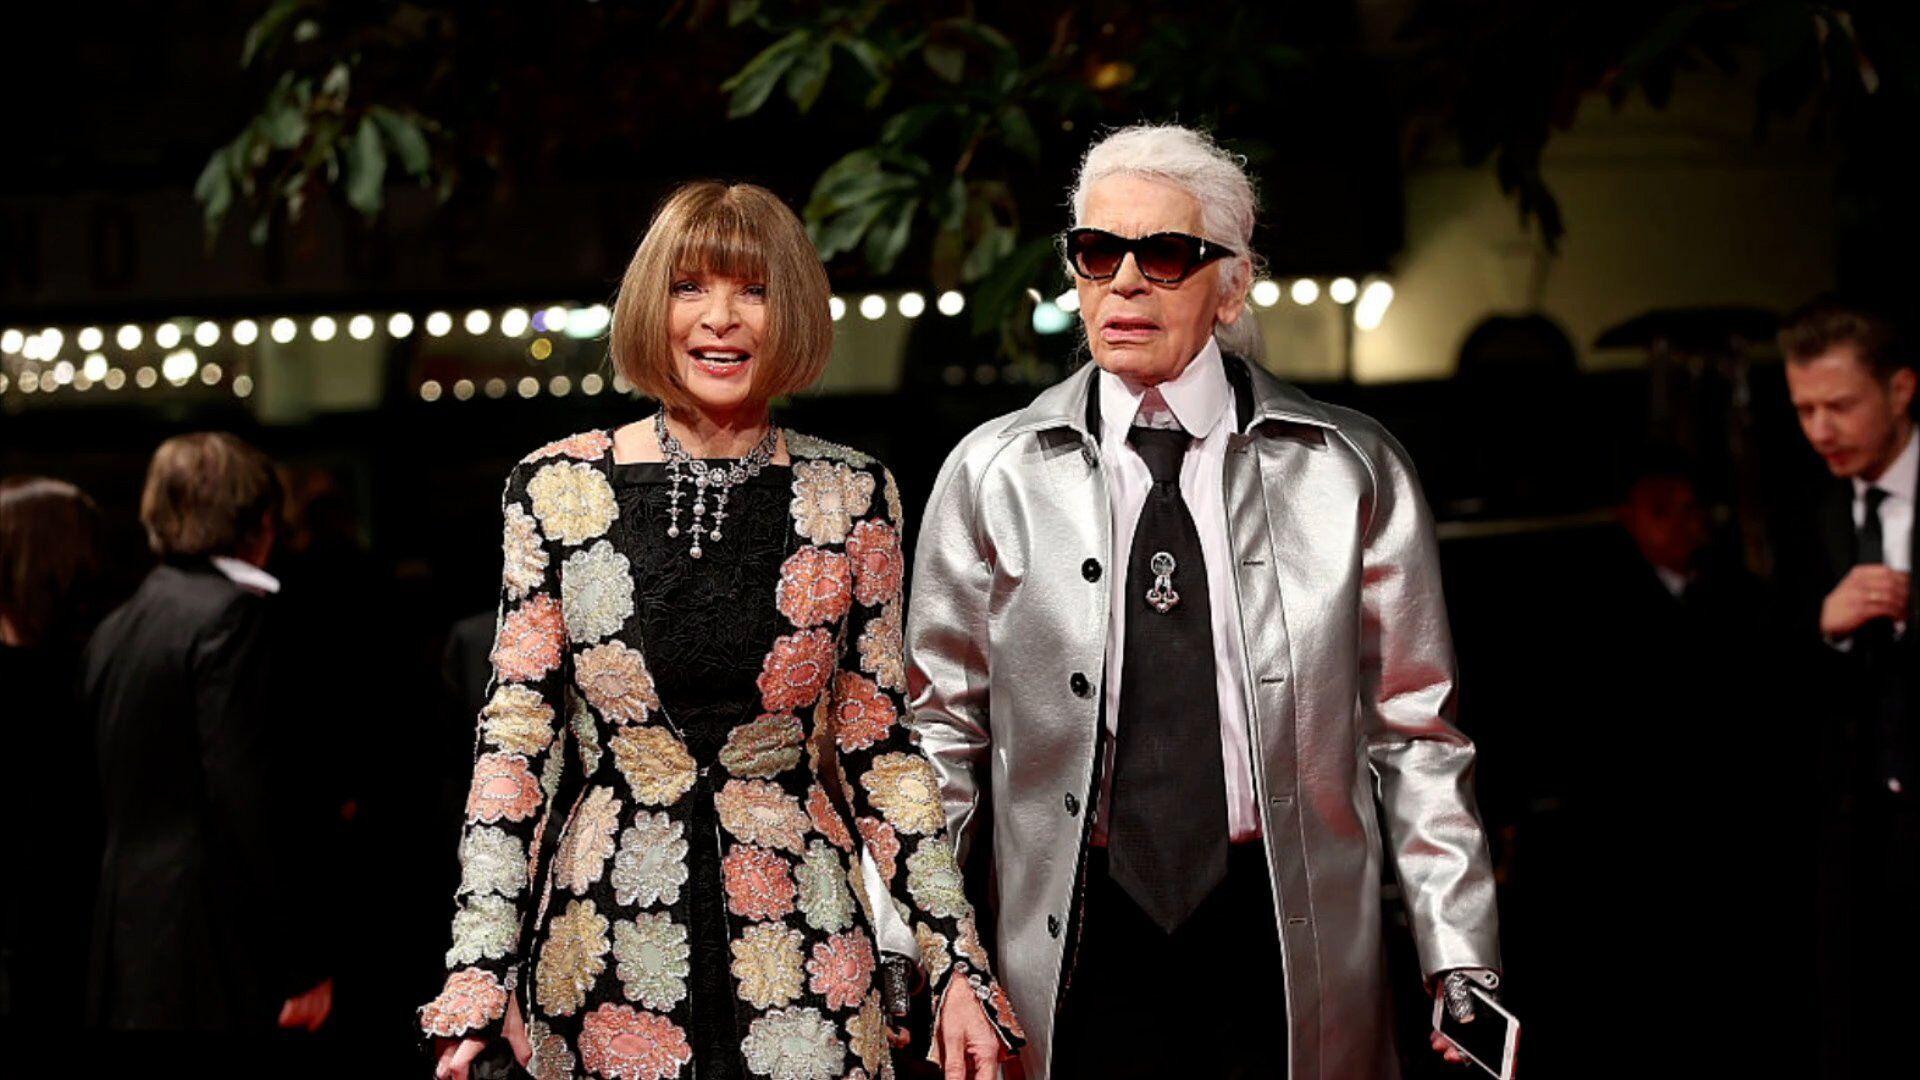 The Best Karl Lagerfeld For Chanel Looks At The Met Gala Through The Years